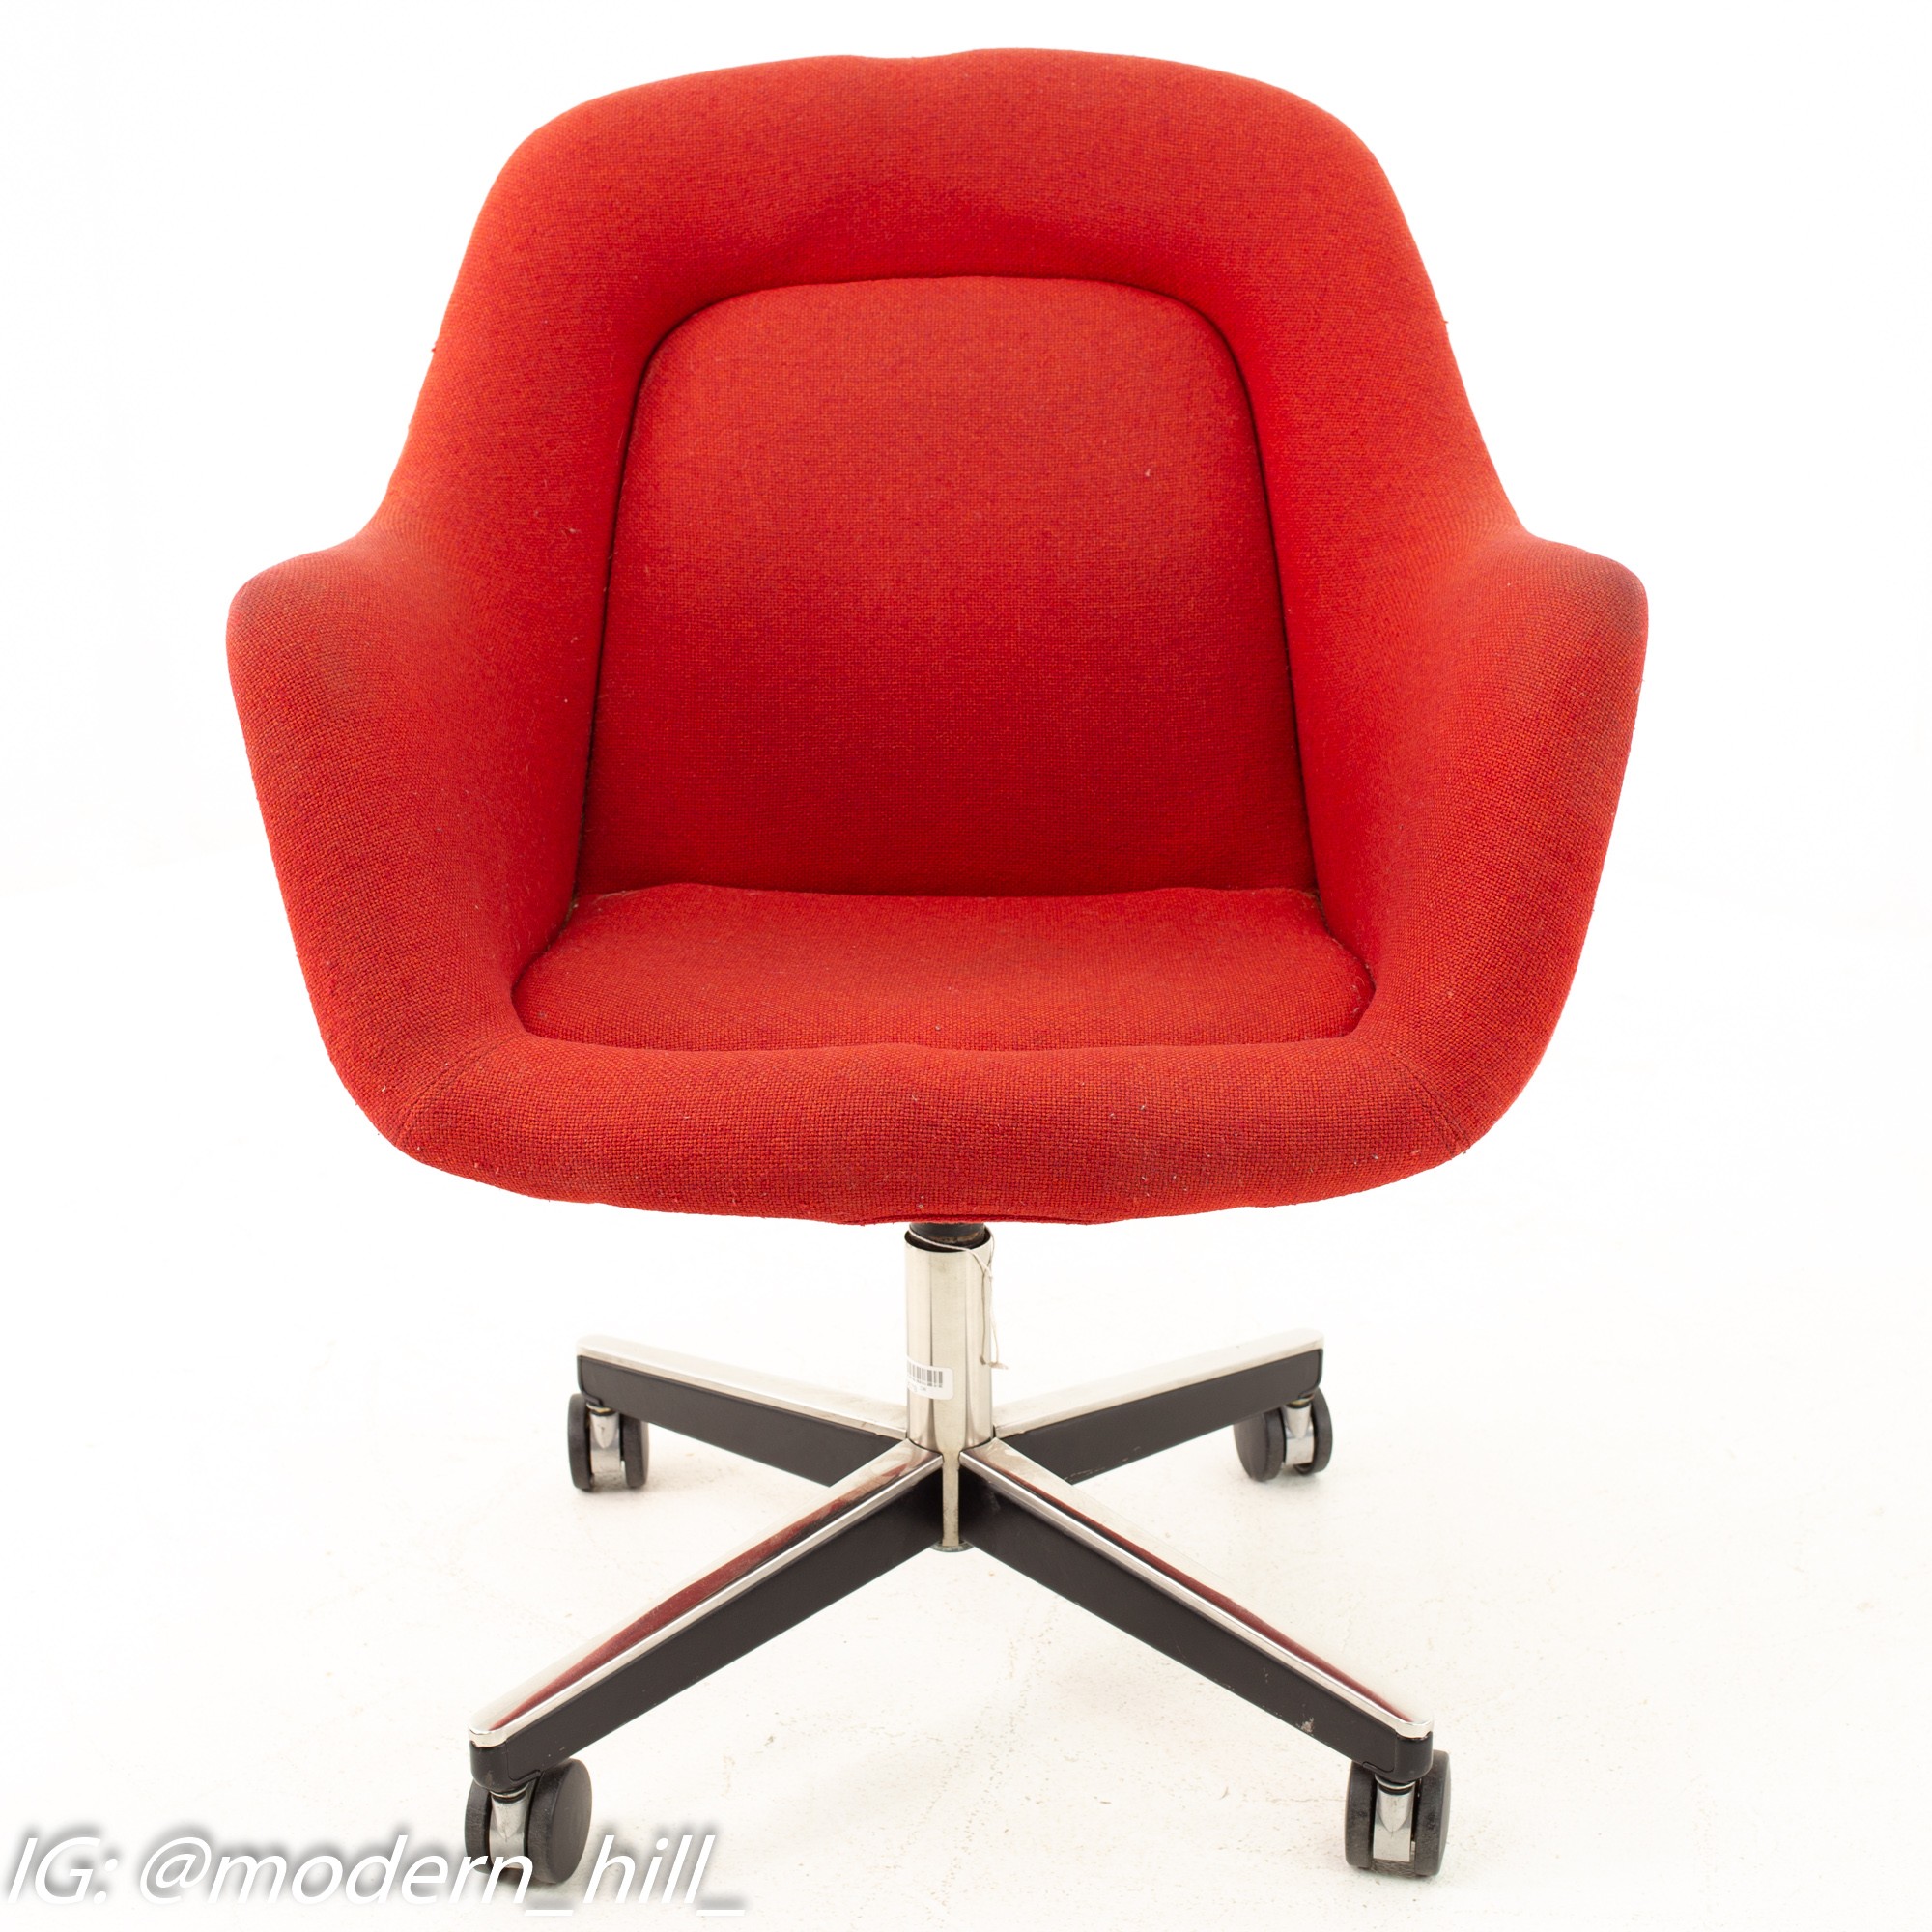 Max Pearson for Knoll Mid Century Red Upholstered Office Desk Chair